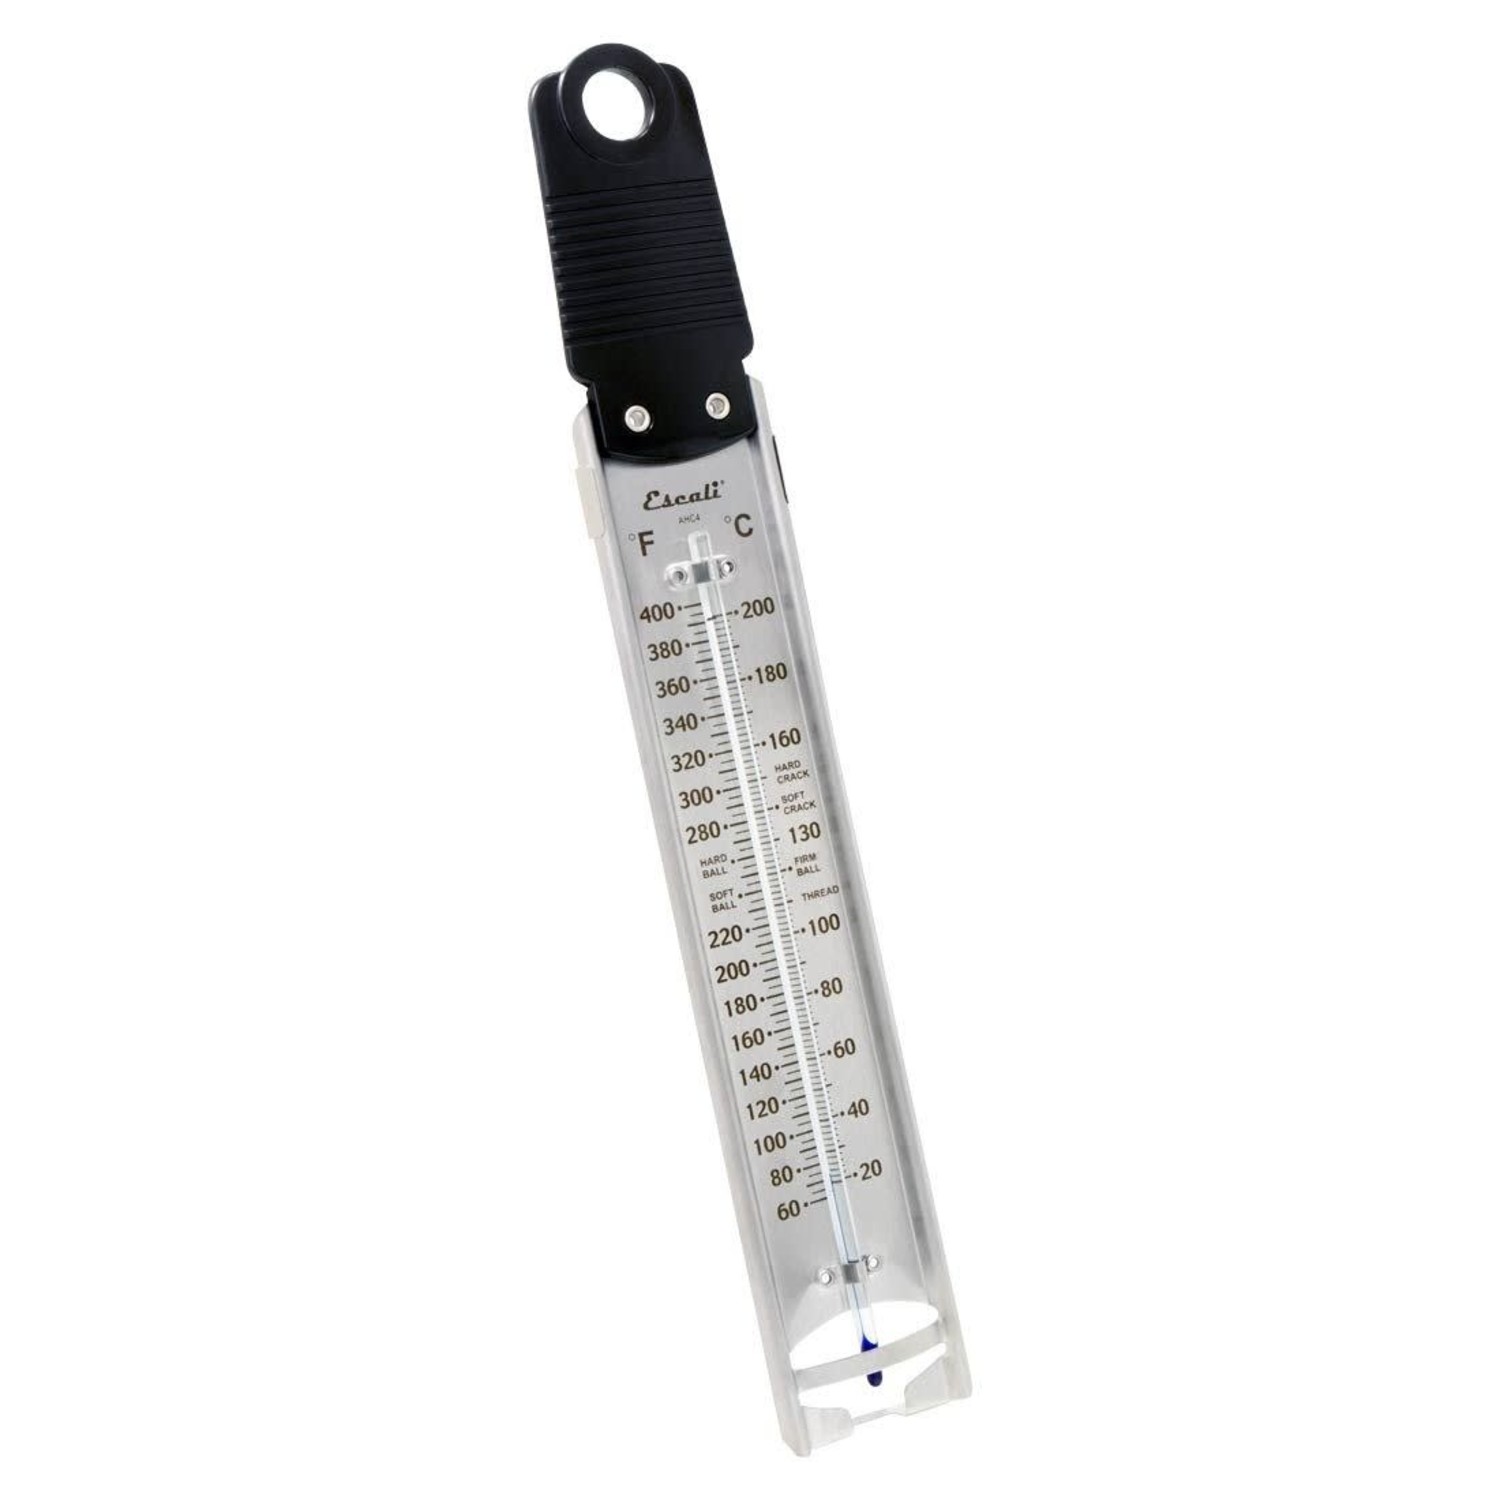 POLDER CANDY/JELLY/DEEP FRY PADDLE THERMOMETER.